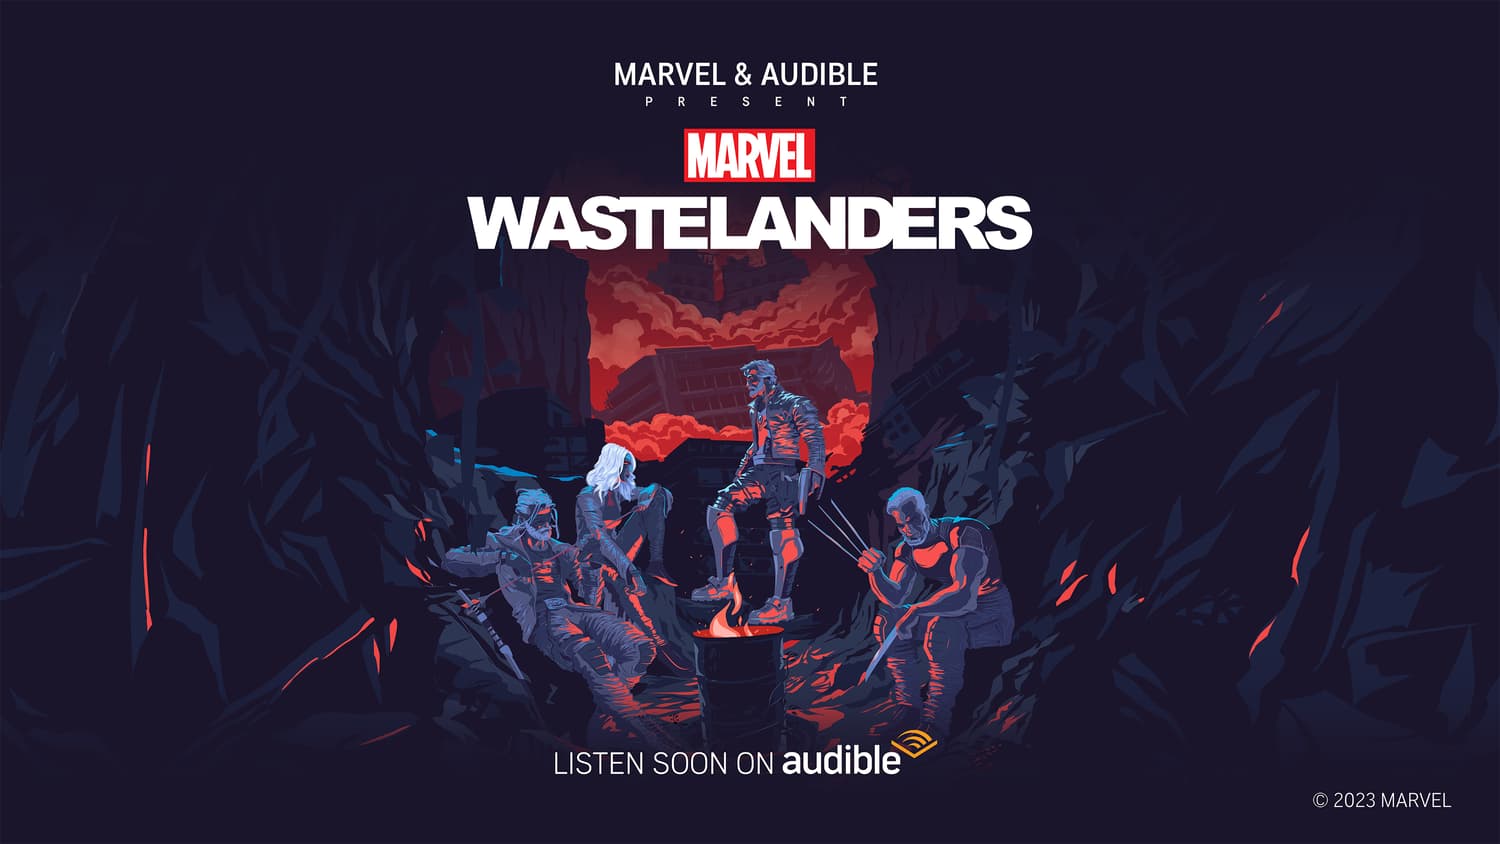 Marvel Entertainment And Audible Present 'Marvel’s Wastelanders'